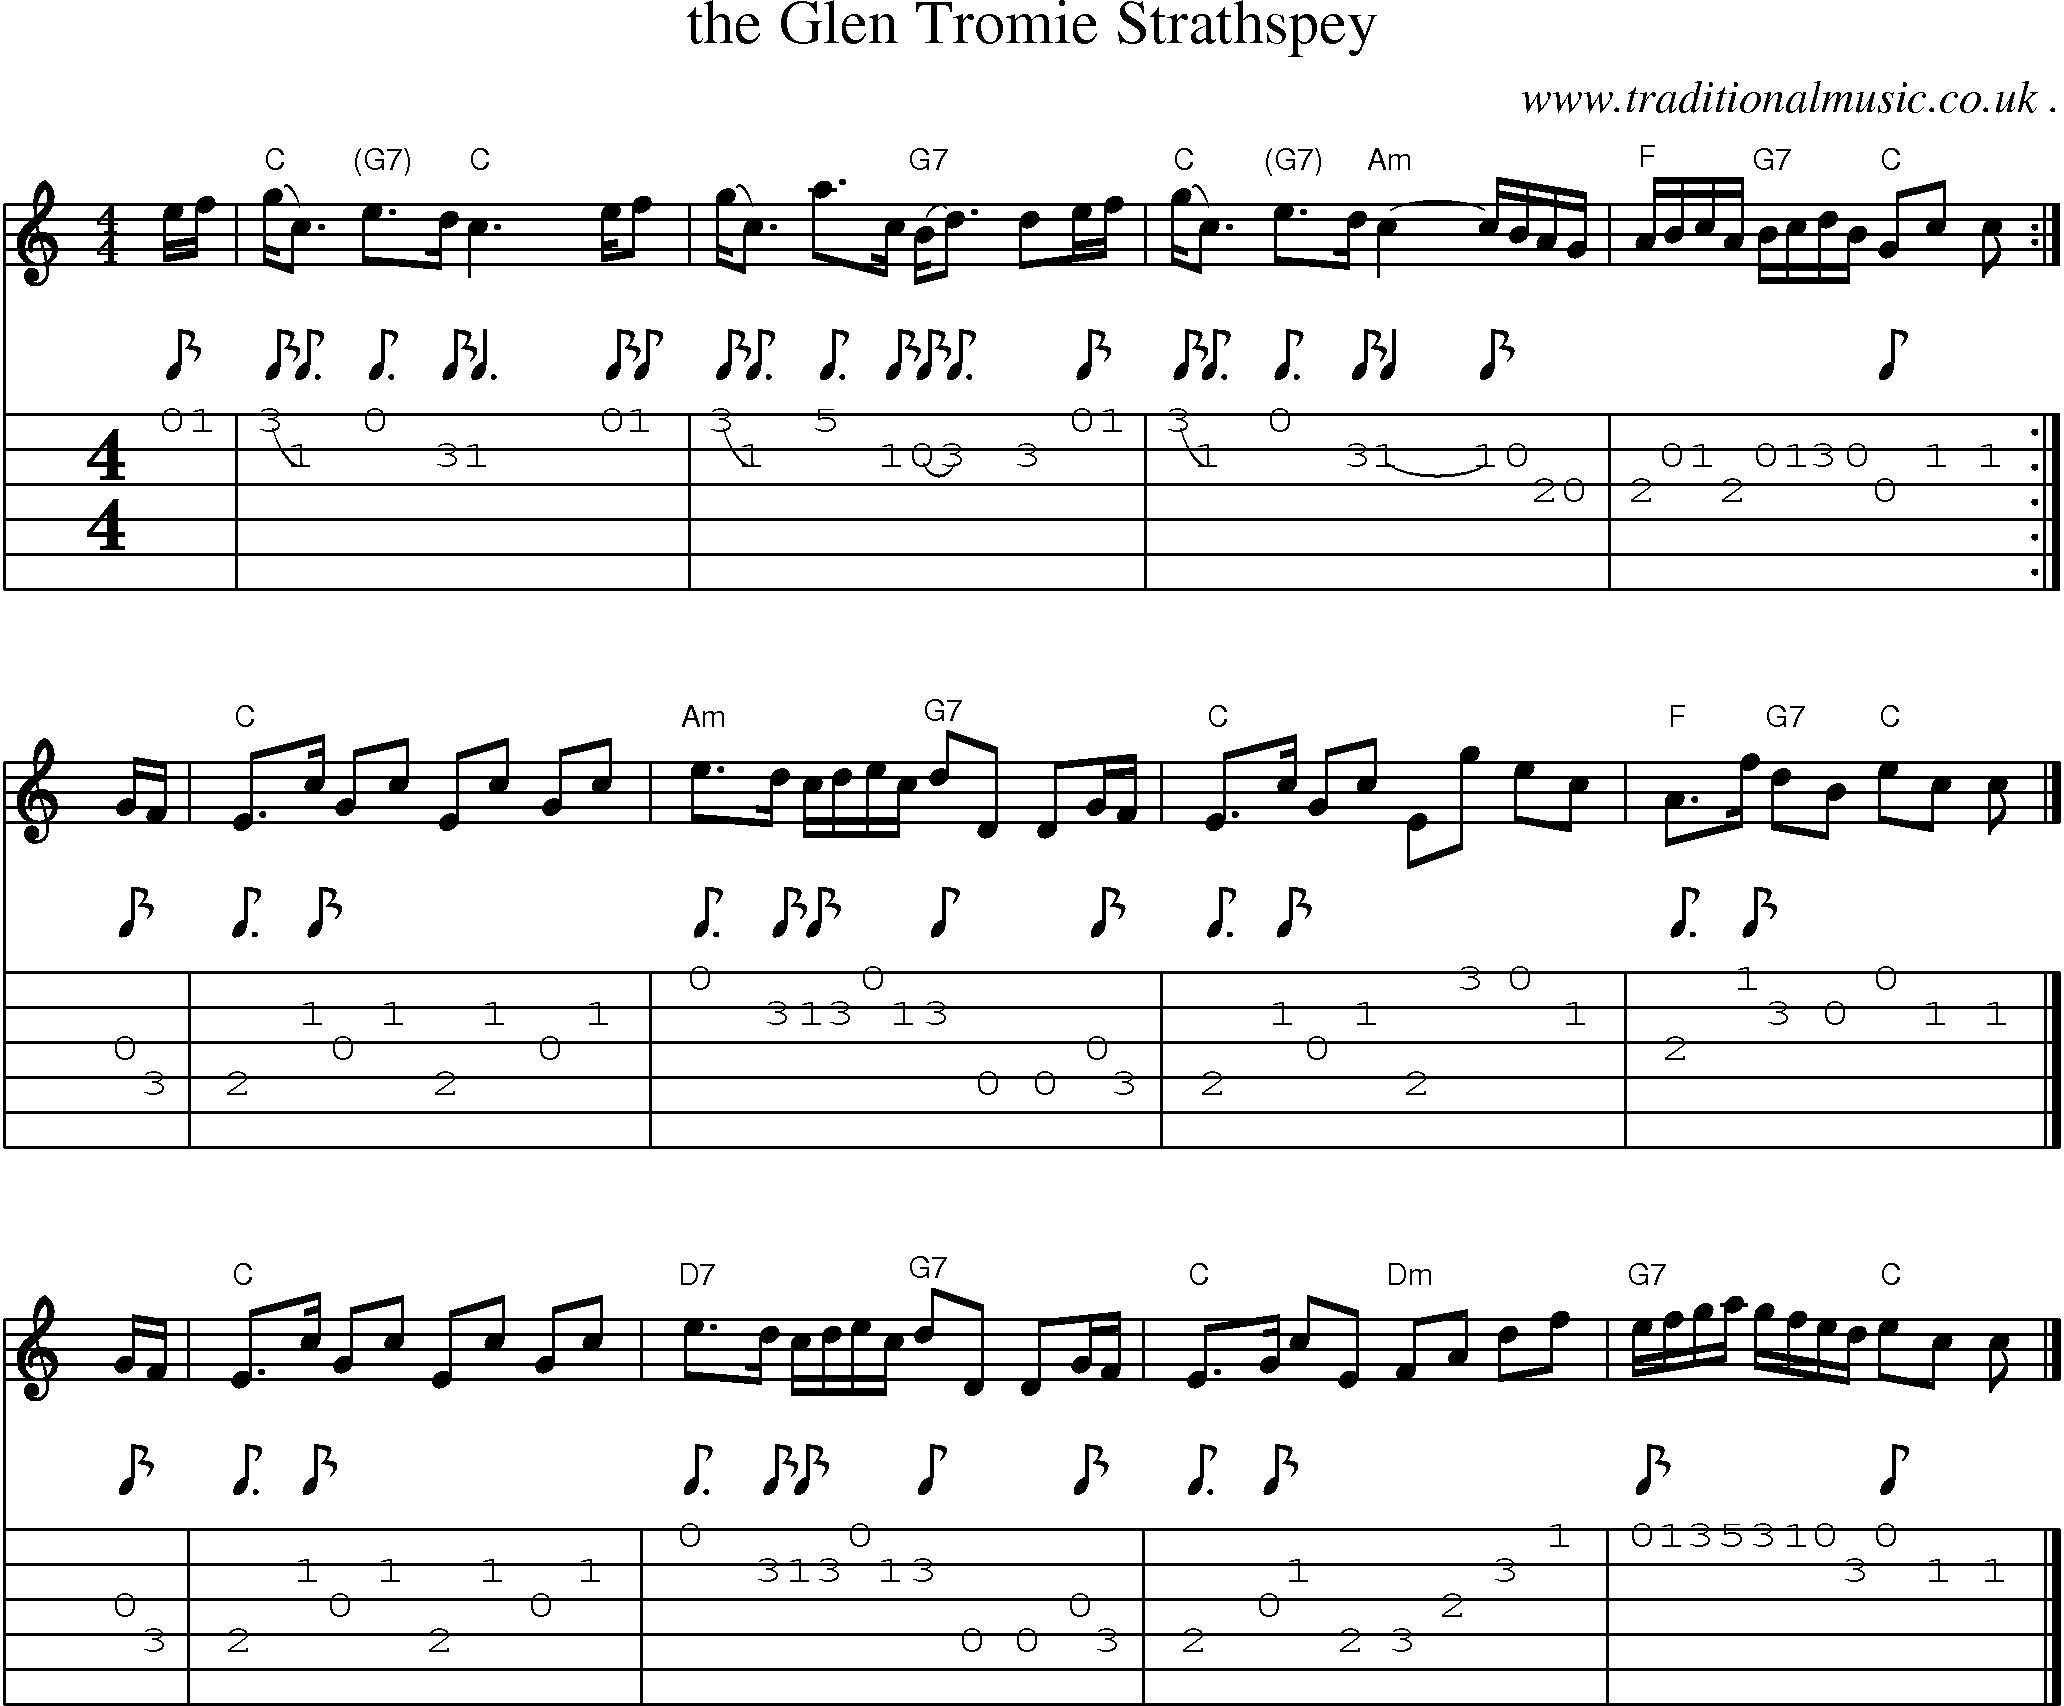 Sheet-music  score, Chords and Guitar Tabs for The Glen Tromie Strathspey